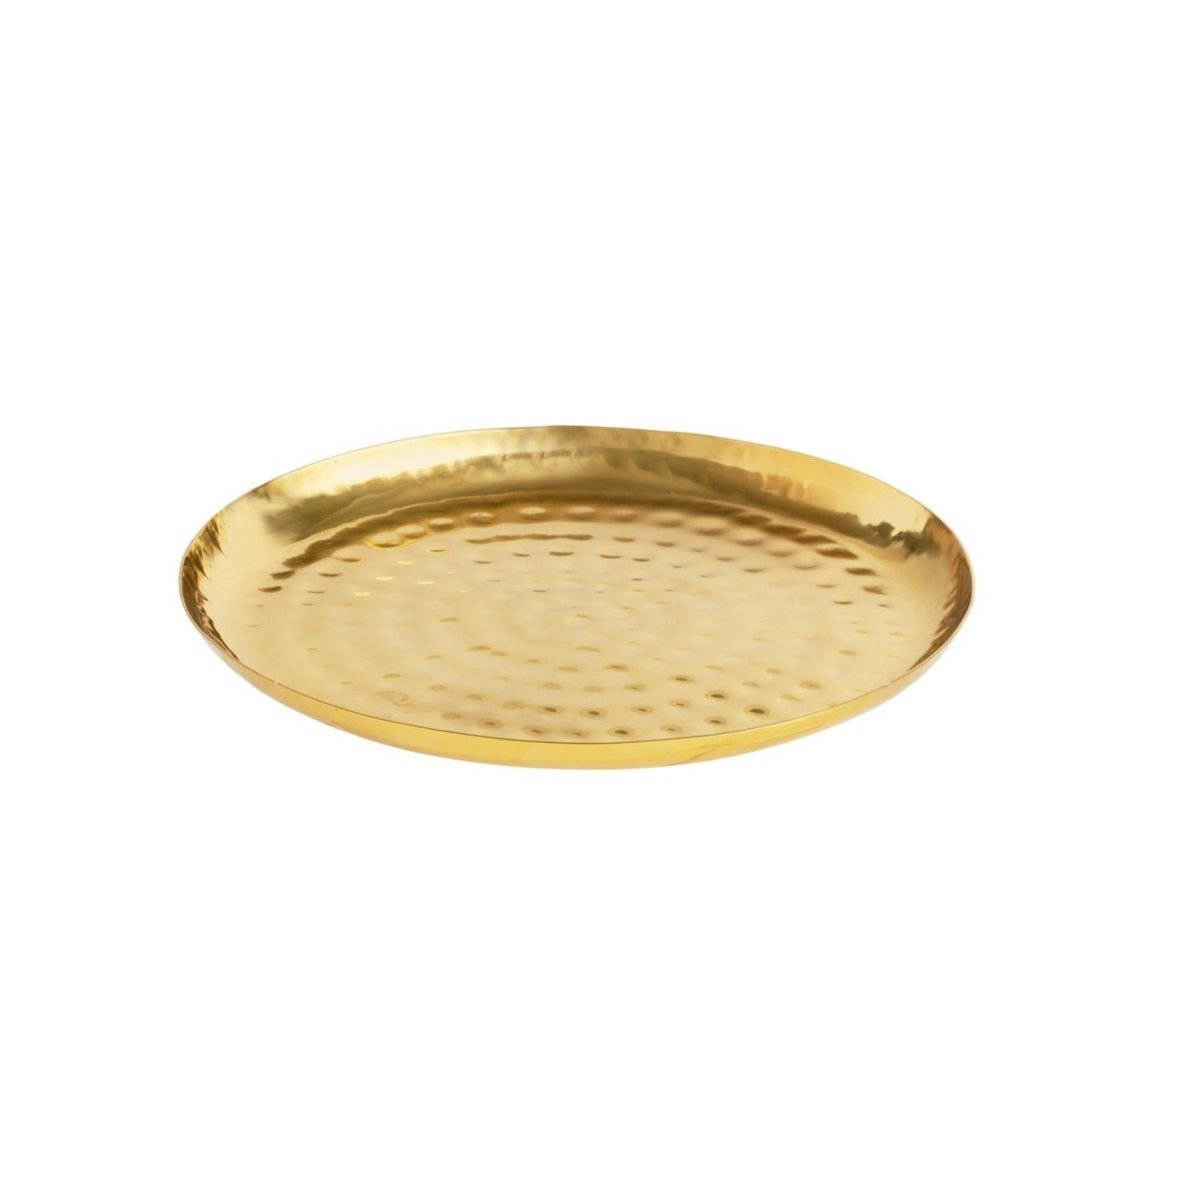 Better Homes & Gardens 16 Round Antique Brass Hammered Metal Tray by Dave  & Jenny Marrs 